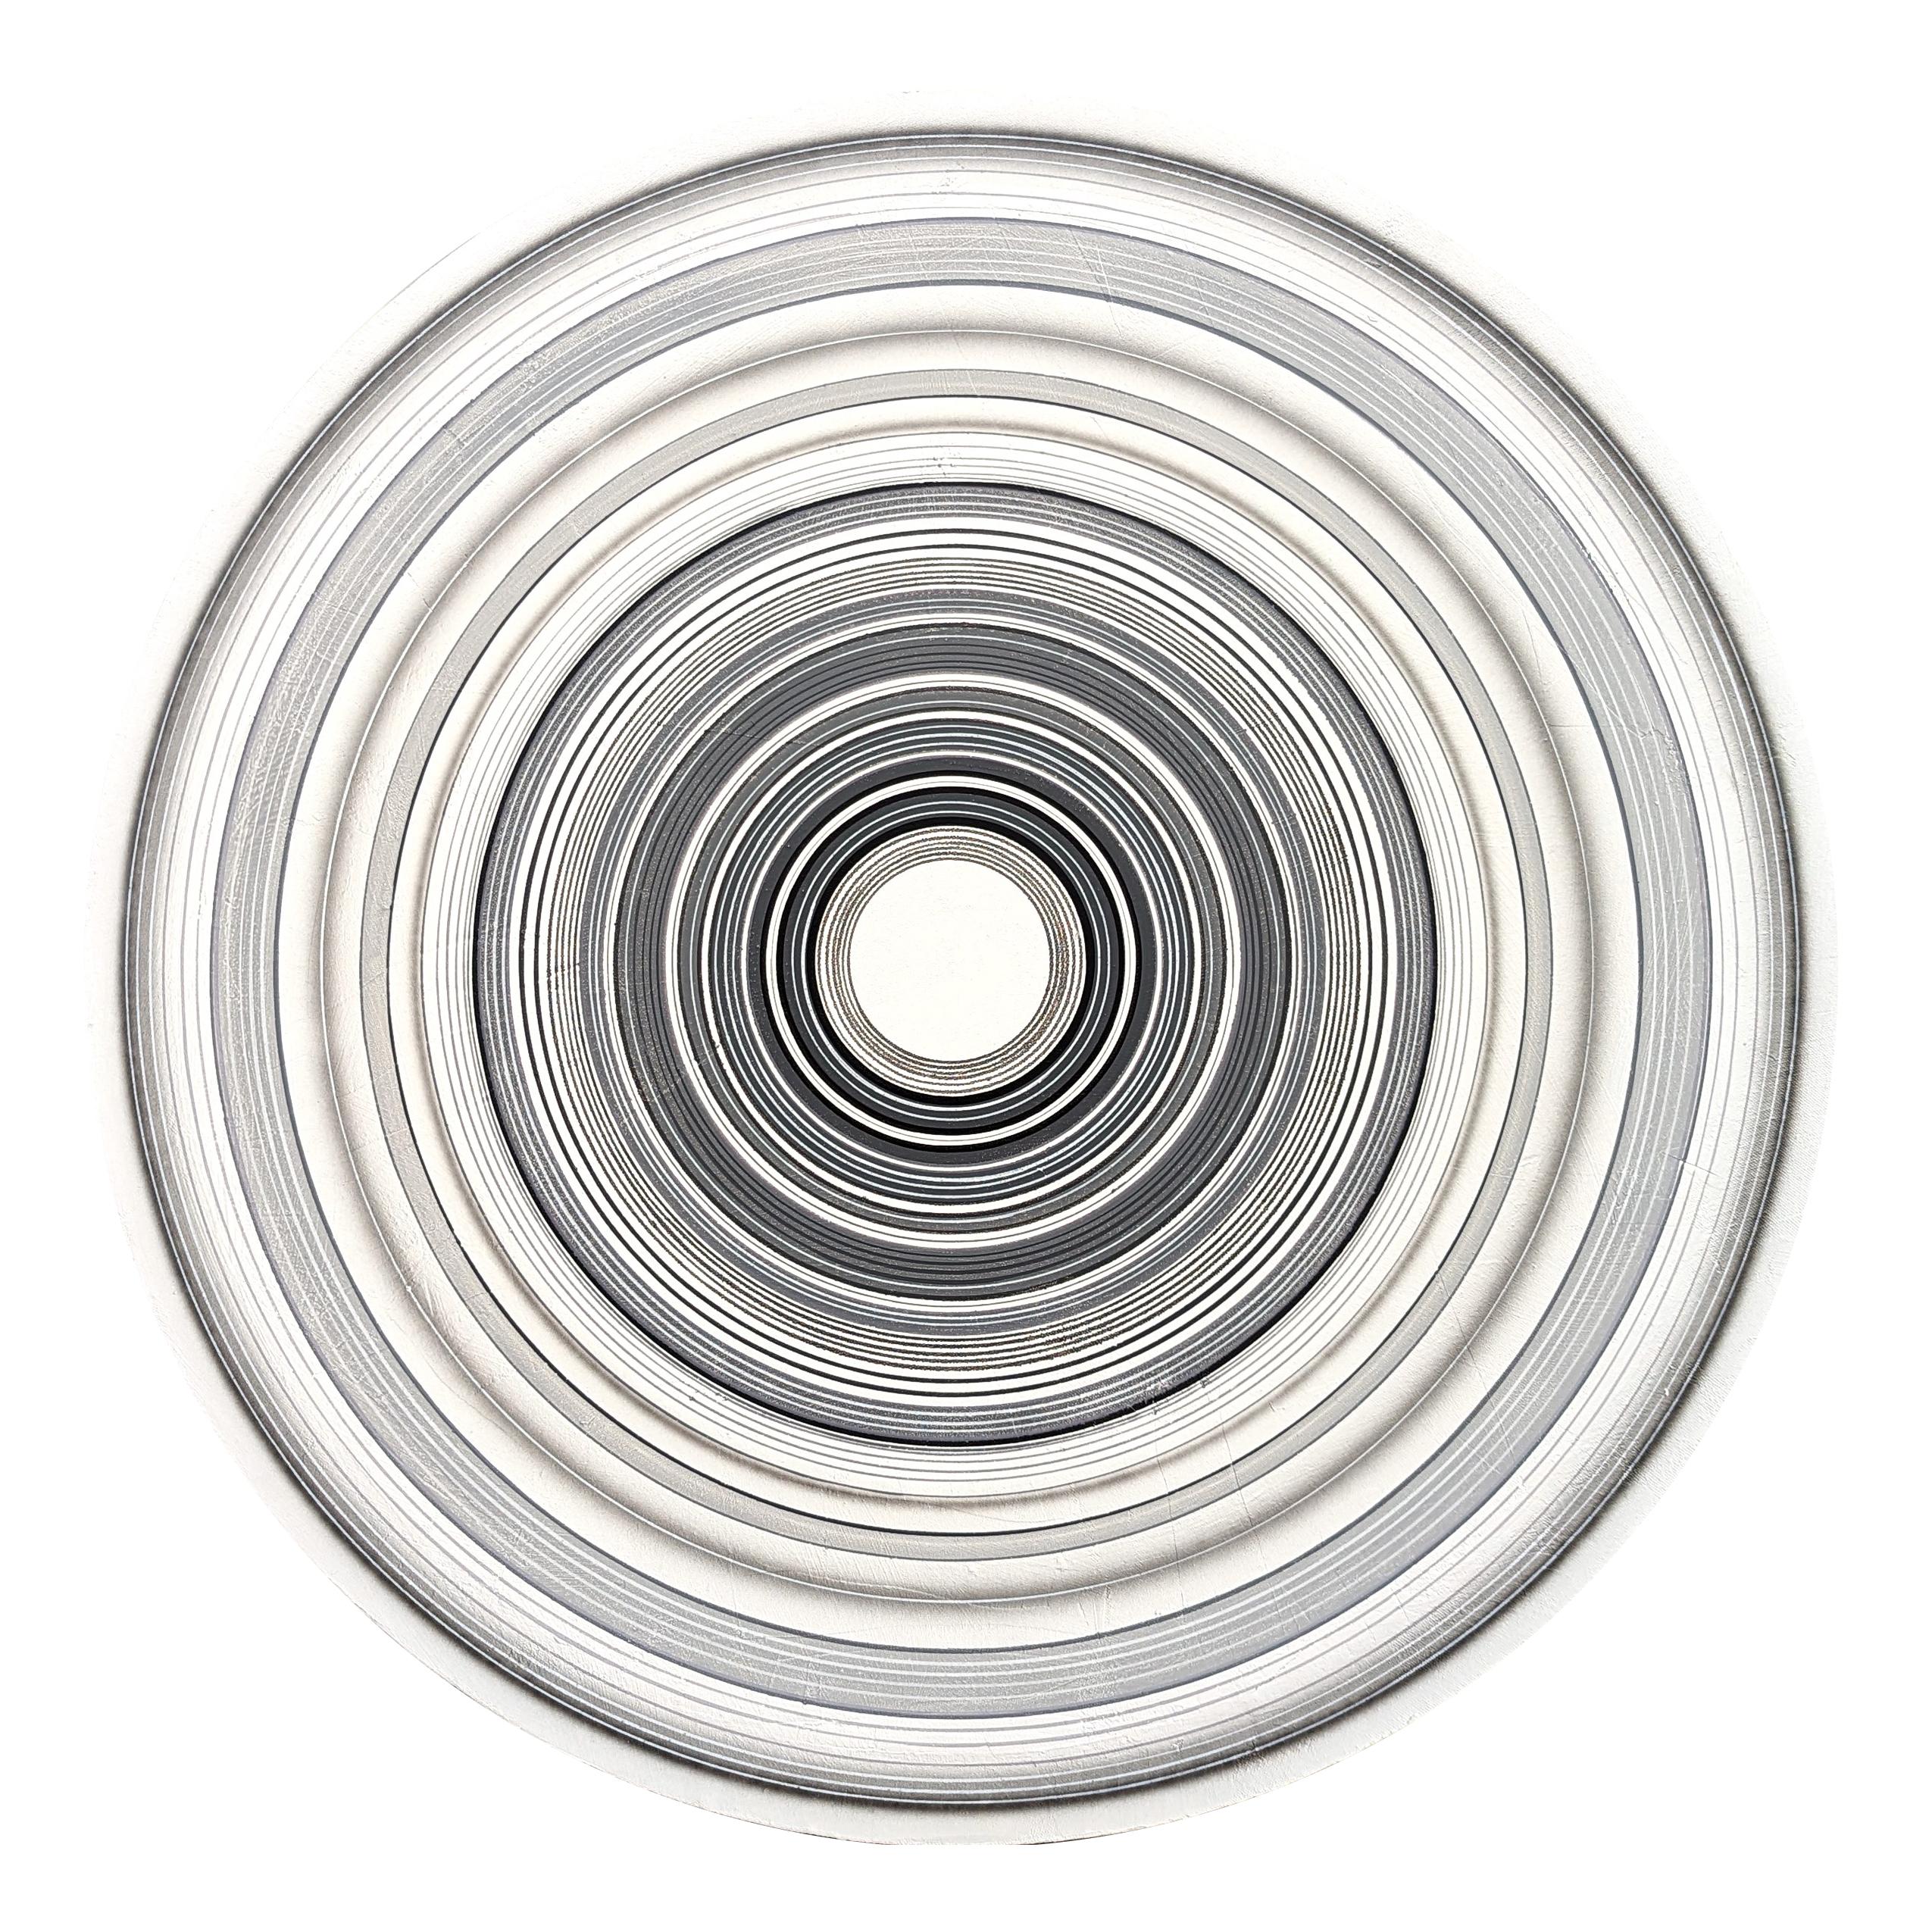 David Hardaker Abstract Painting - "Kool Thing" Contemporary Abstract Gray and White Concentric Circle Painting